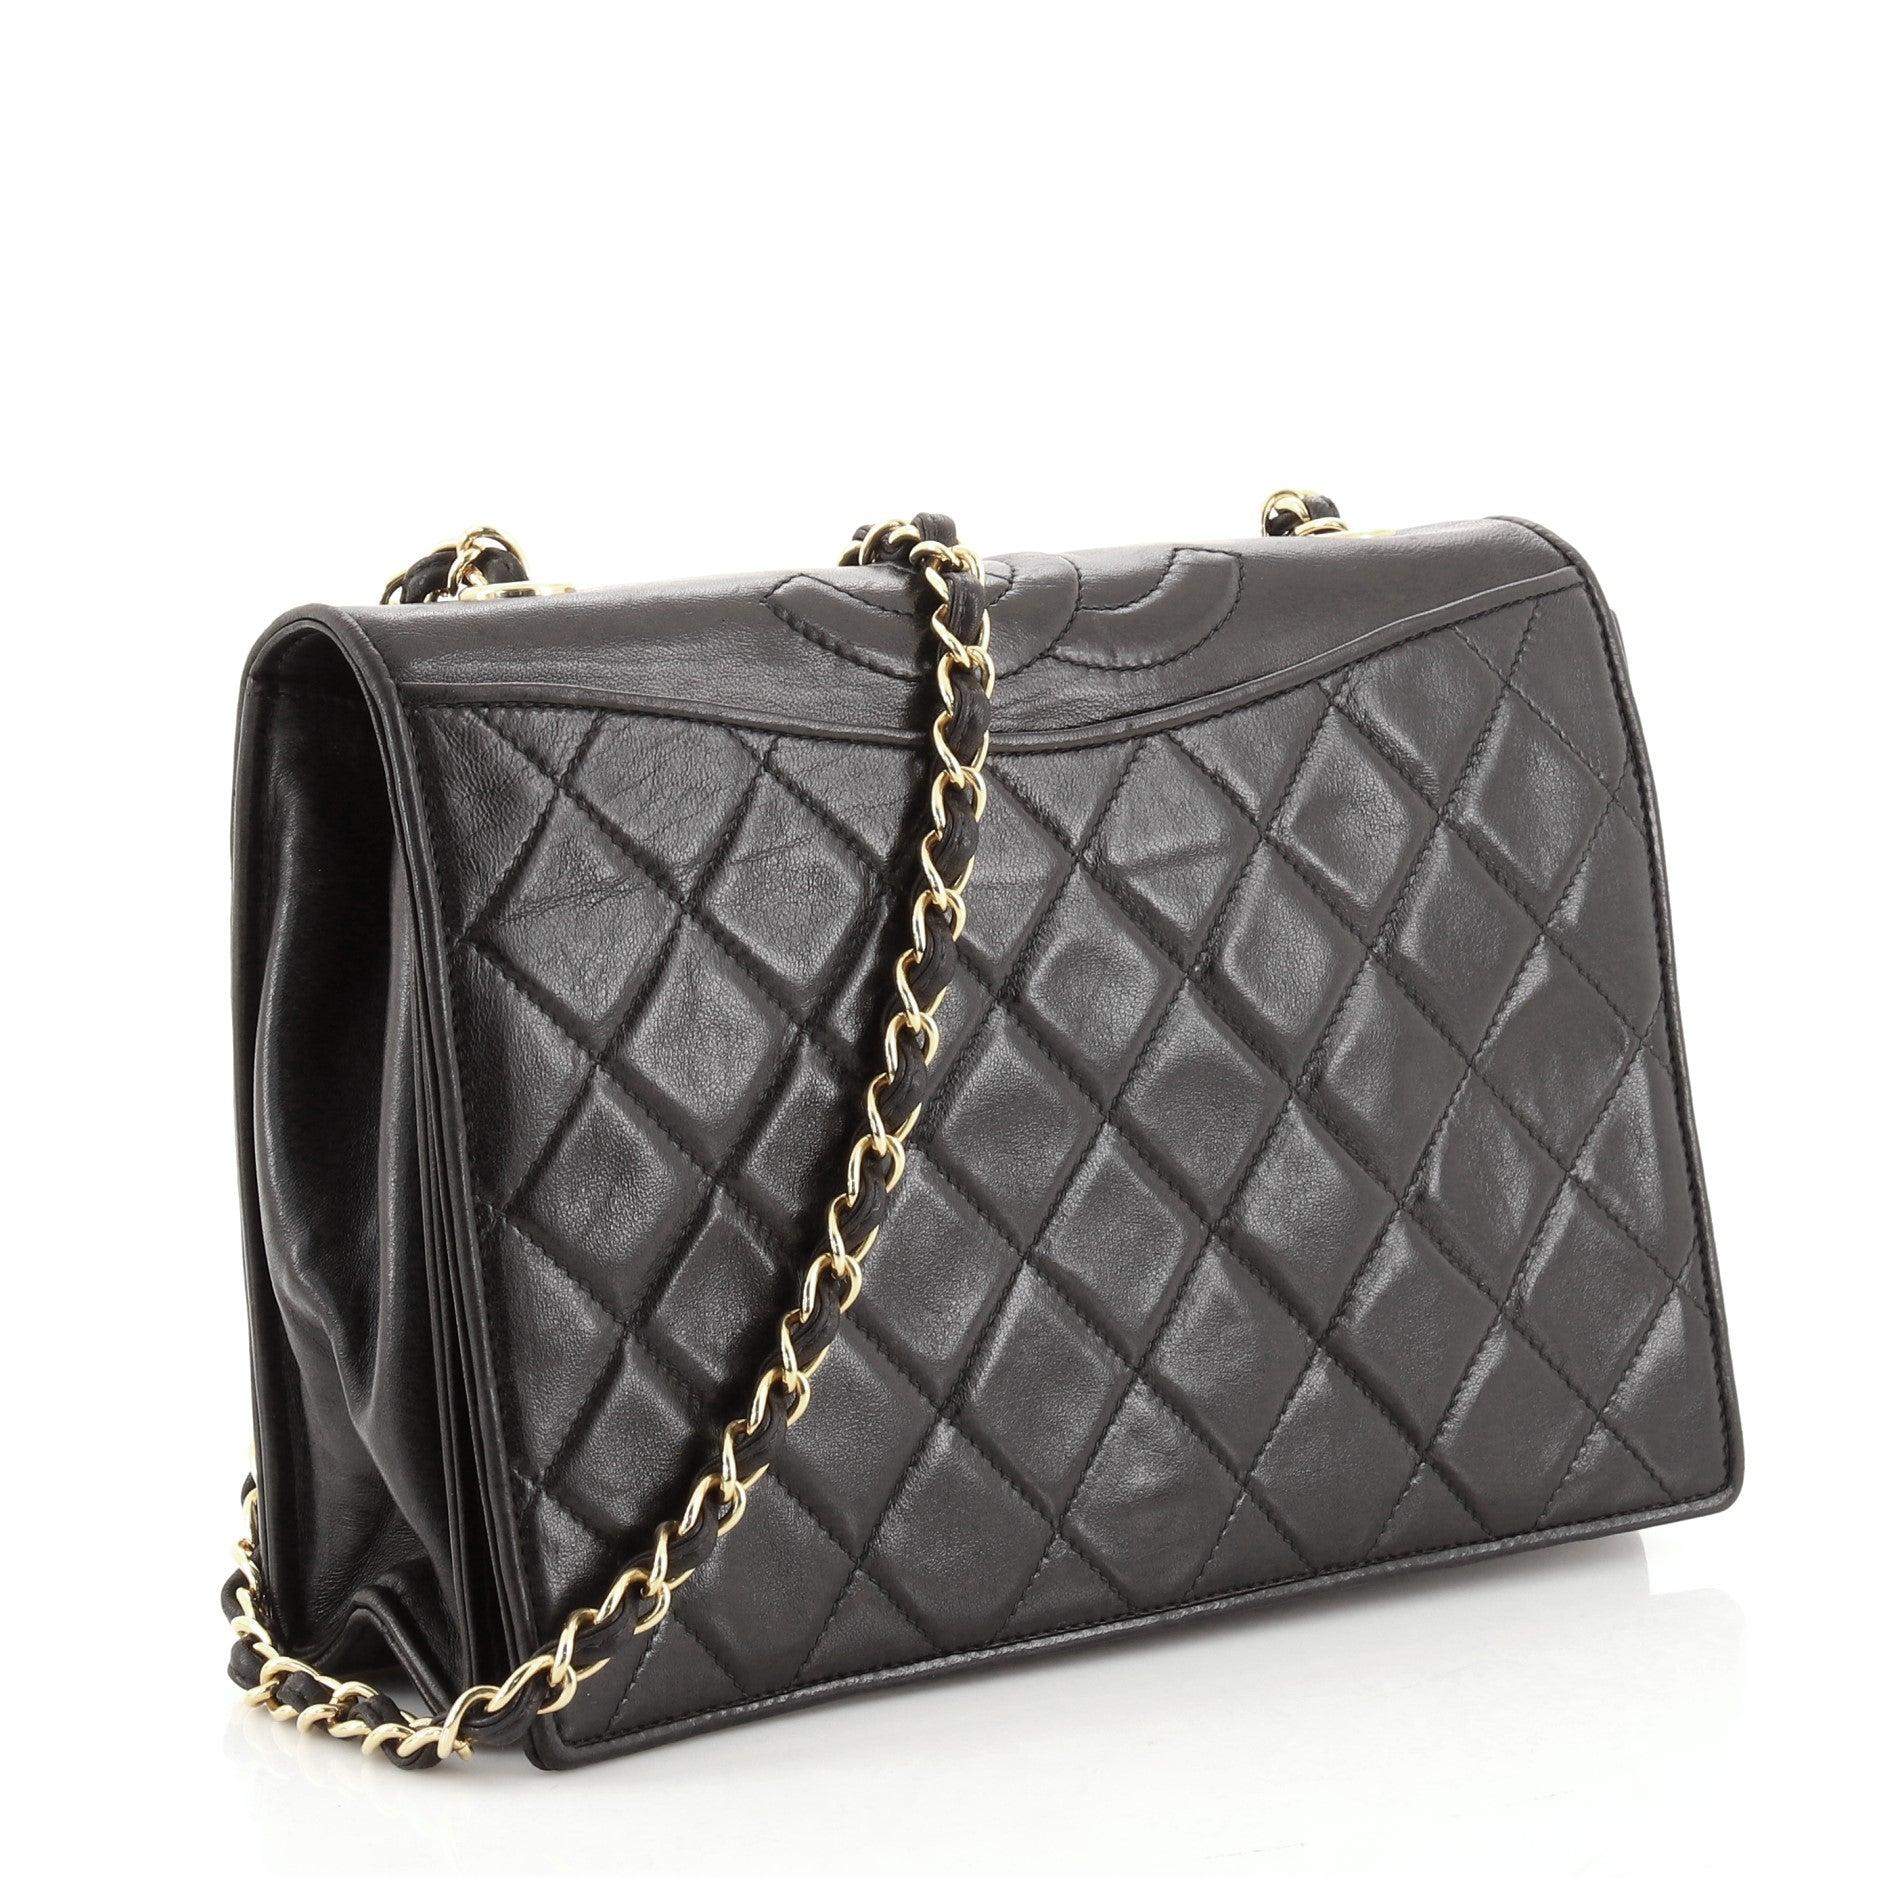 Chanel Vintage Black Quilted Lambskin Leather CC Full Medium Flap Bag

Condition Details: Odor in interior. Creasing, moderate wear, scuffs and indentations on exterior and underneath flap, heavy wear on exterior and flap edges, moderate wear on